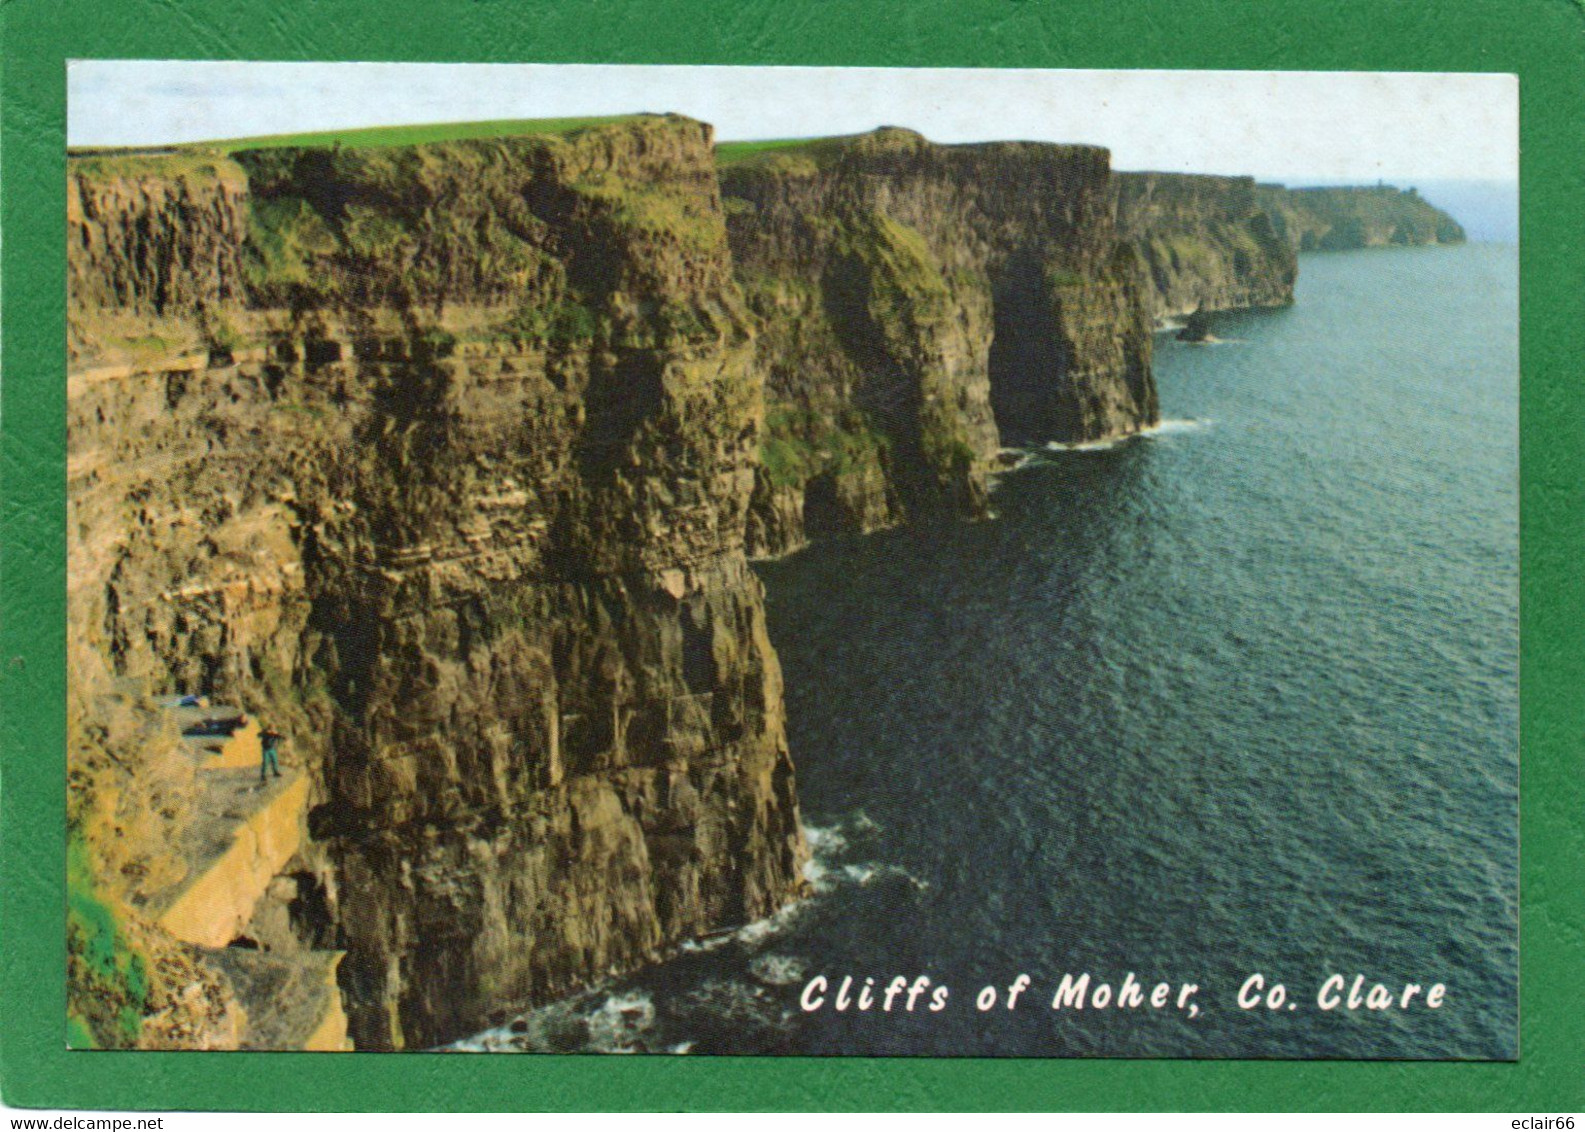 The Cliffs Of Moher Co Clare These Majestic Cliffs Amont The Most Magnificent Stretches Of Cliff - Clare